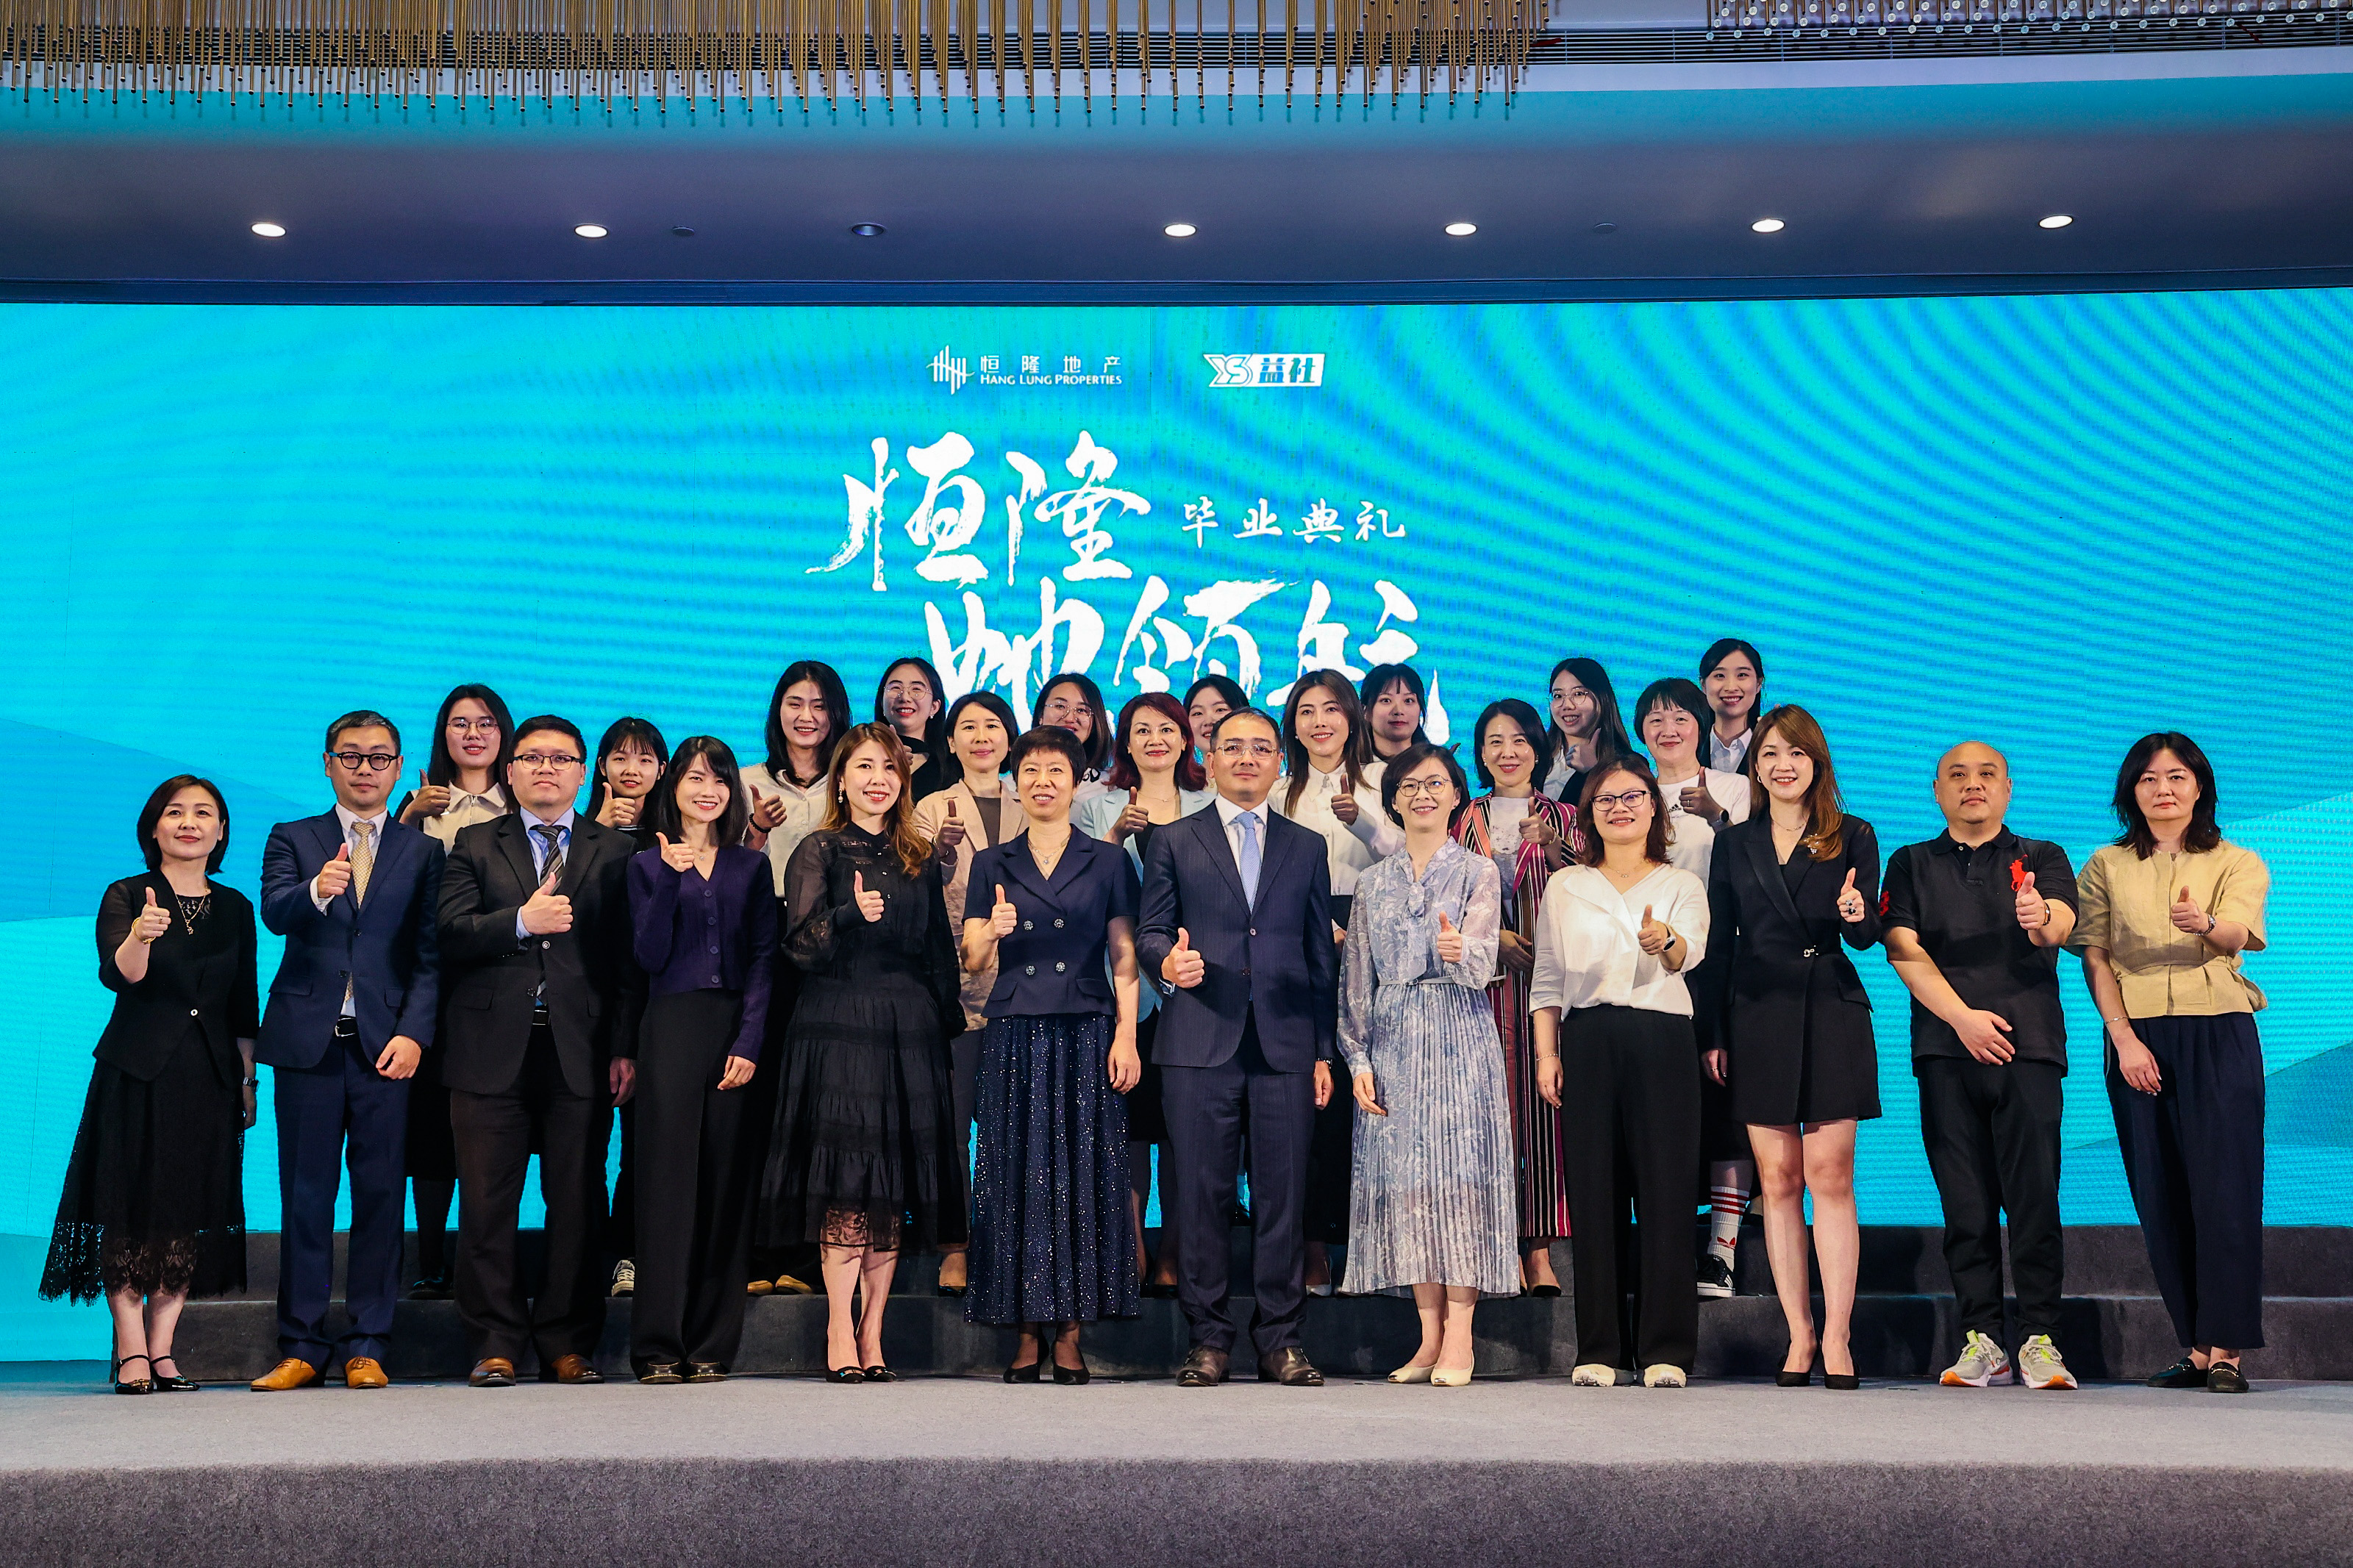 Group photo from the graduation ceremony of the inaugural Hang Lung Future Women Leaders Program